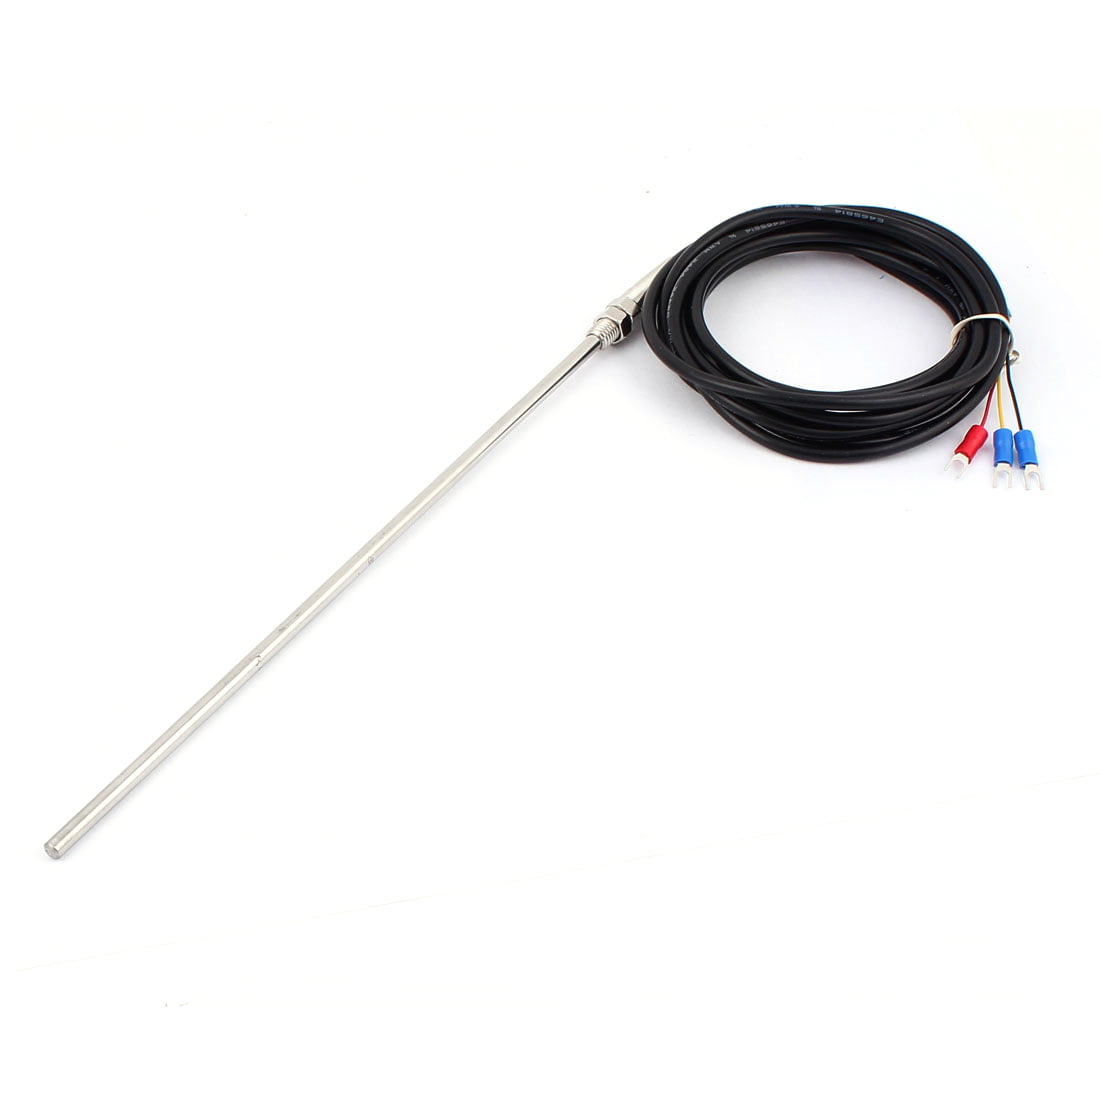 Pt100 Temperature Sensor Probe 1 Meters Cable 6mm Hole Thermocouple 